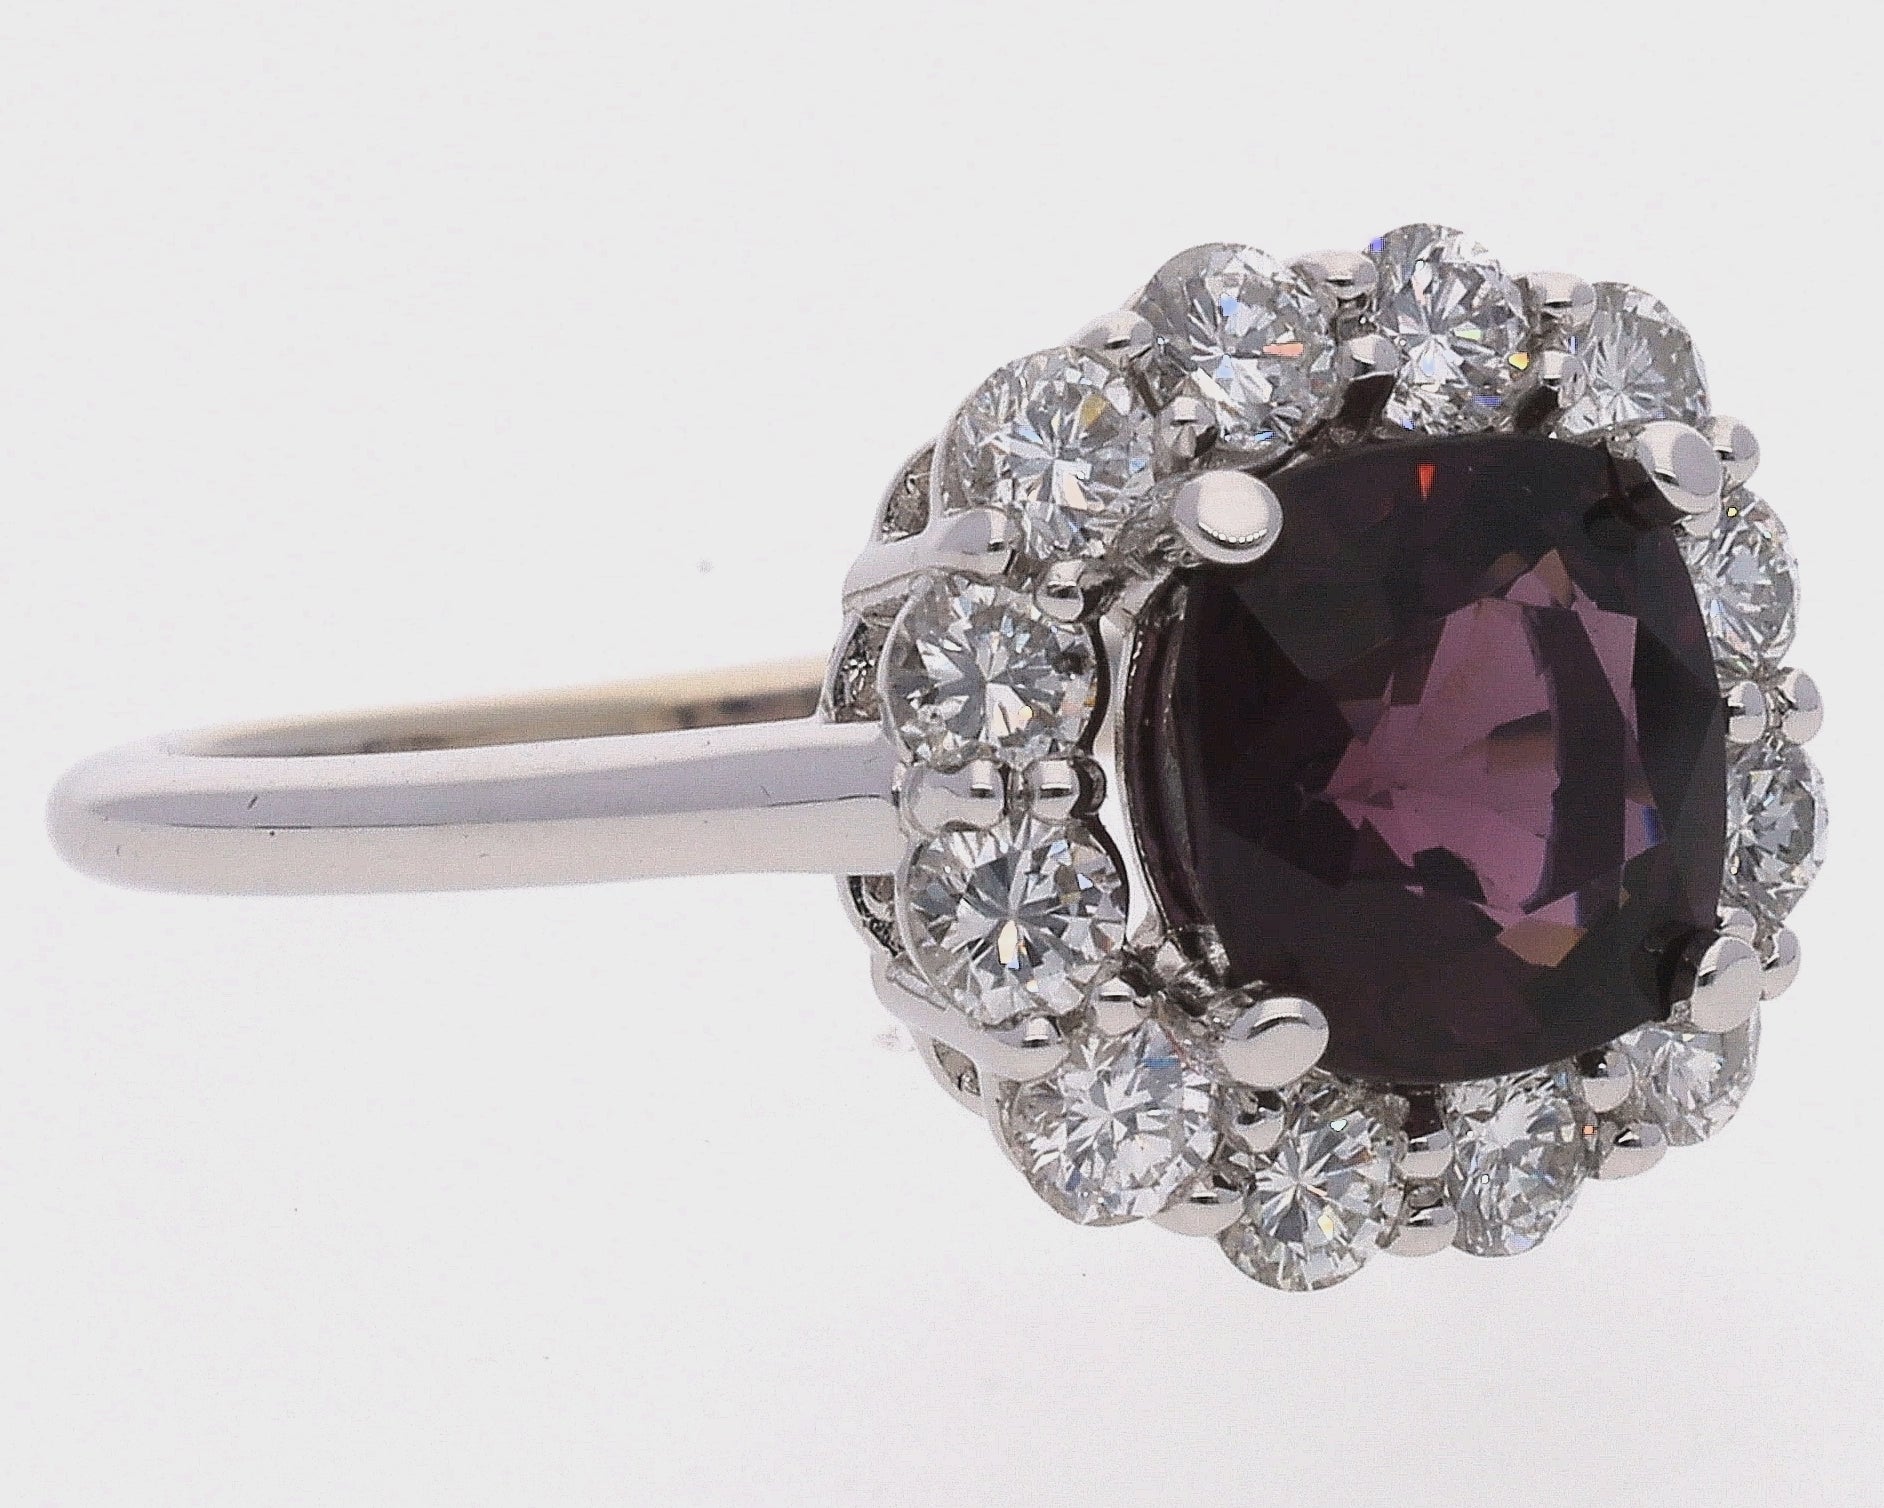 14K White Gold Cushion Cut Spinel and Diamond Ring